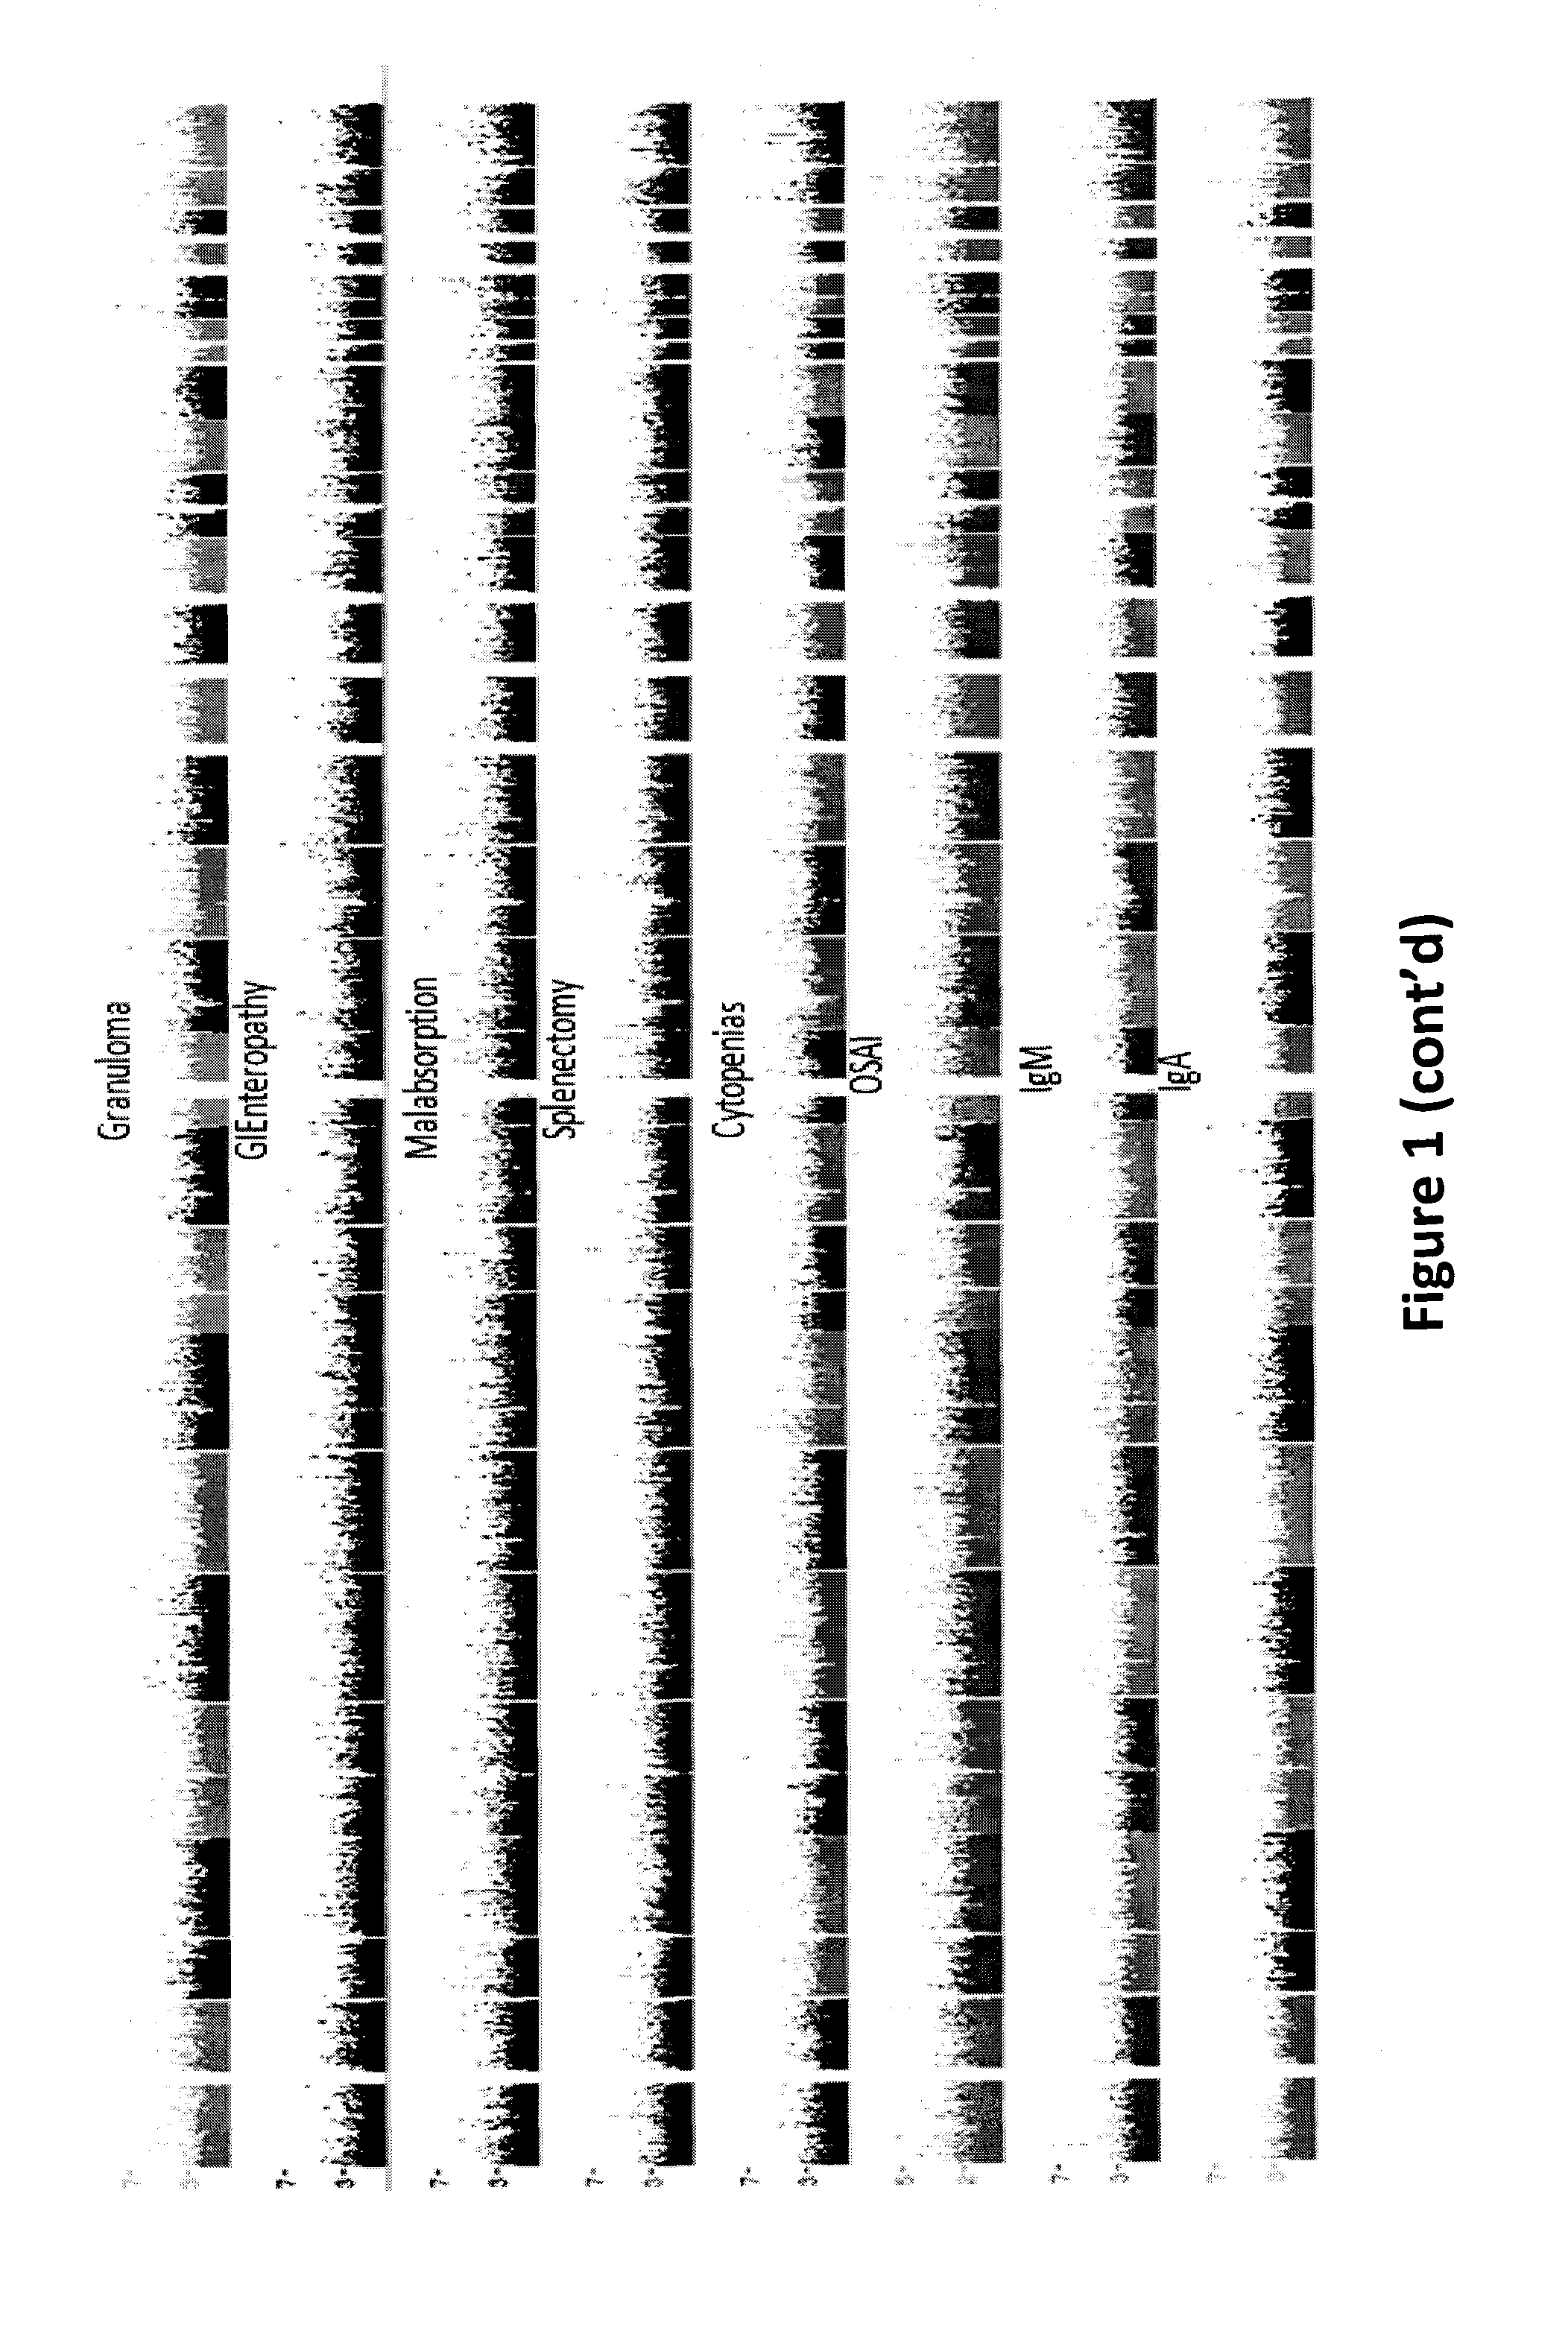 Common and Rare Genetic Variations Associated with Common Variable Immunodeficiency (CVID) and Methods of Use Thereof for the Treatment and Diagnosis of the Same